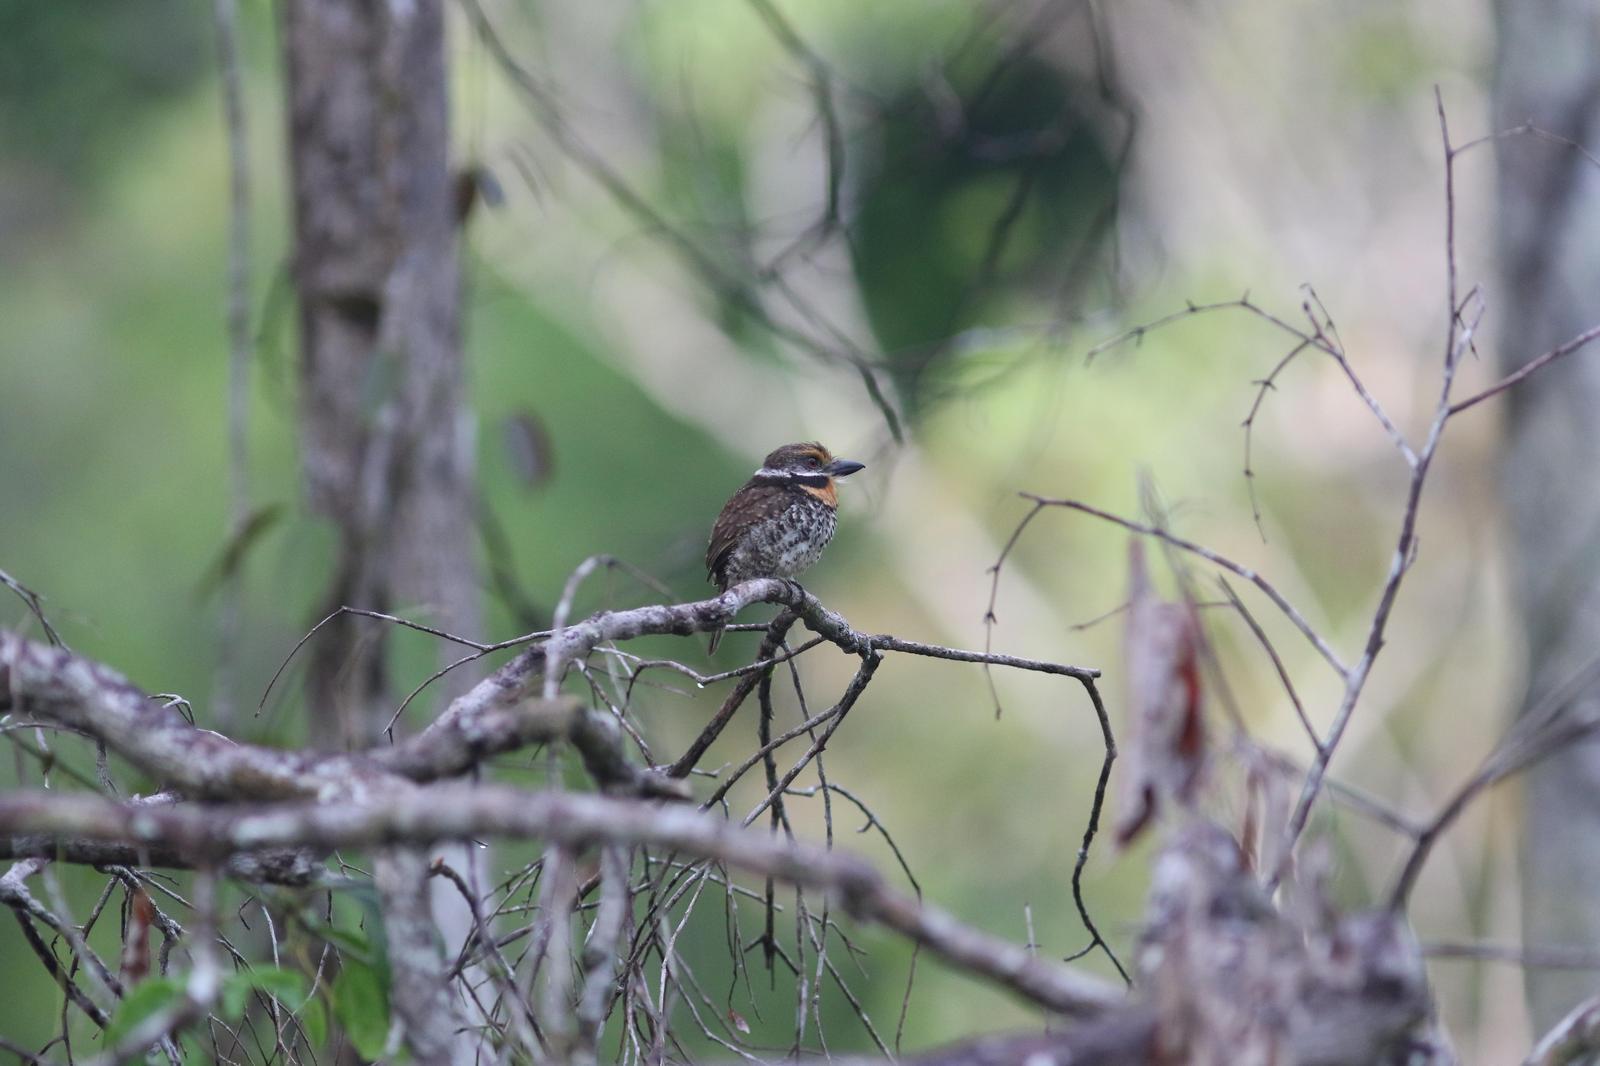 Spotted Puffbird Photo by Leonardo Garrigues